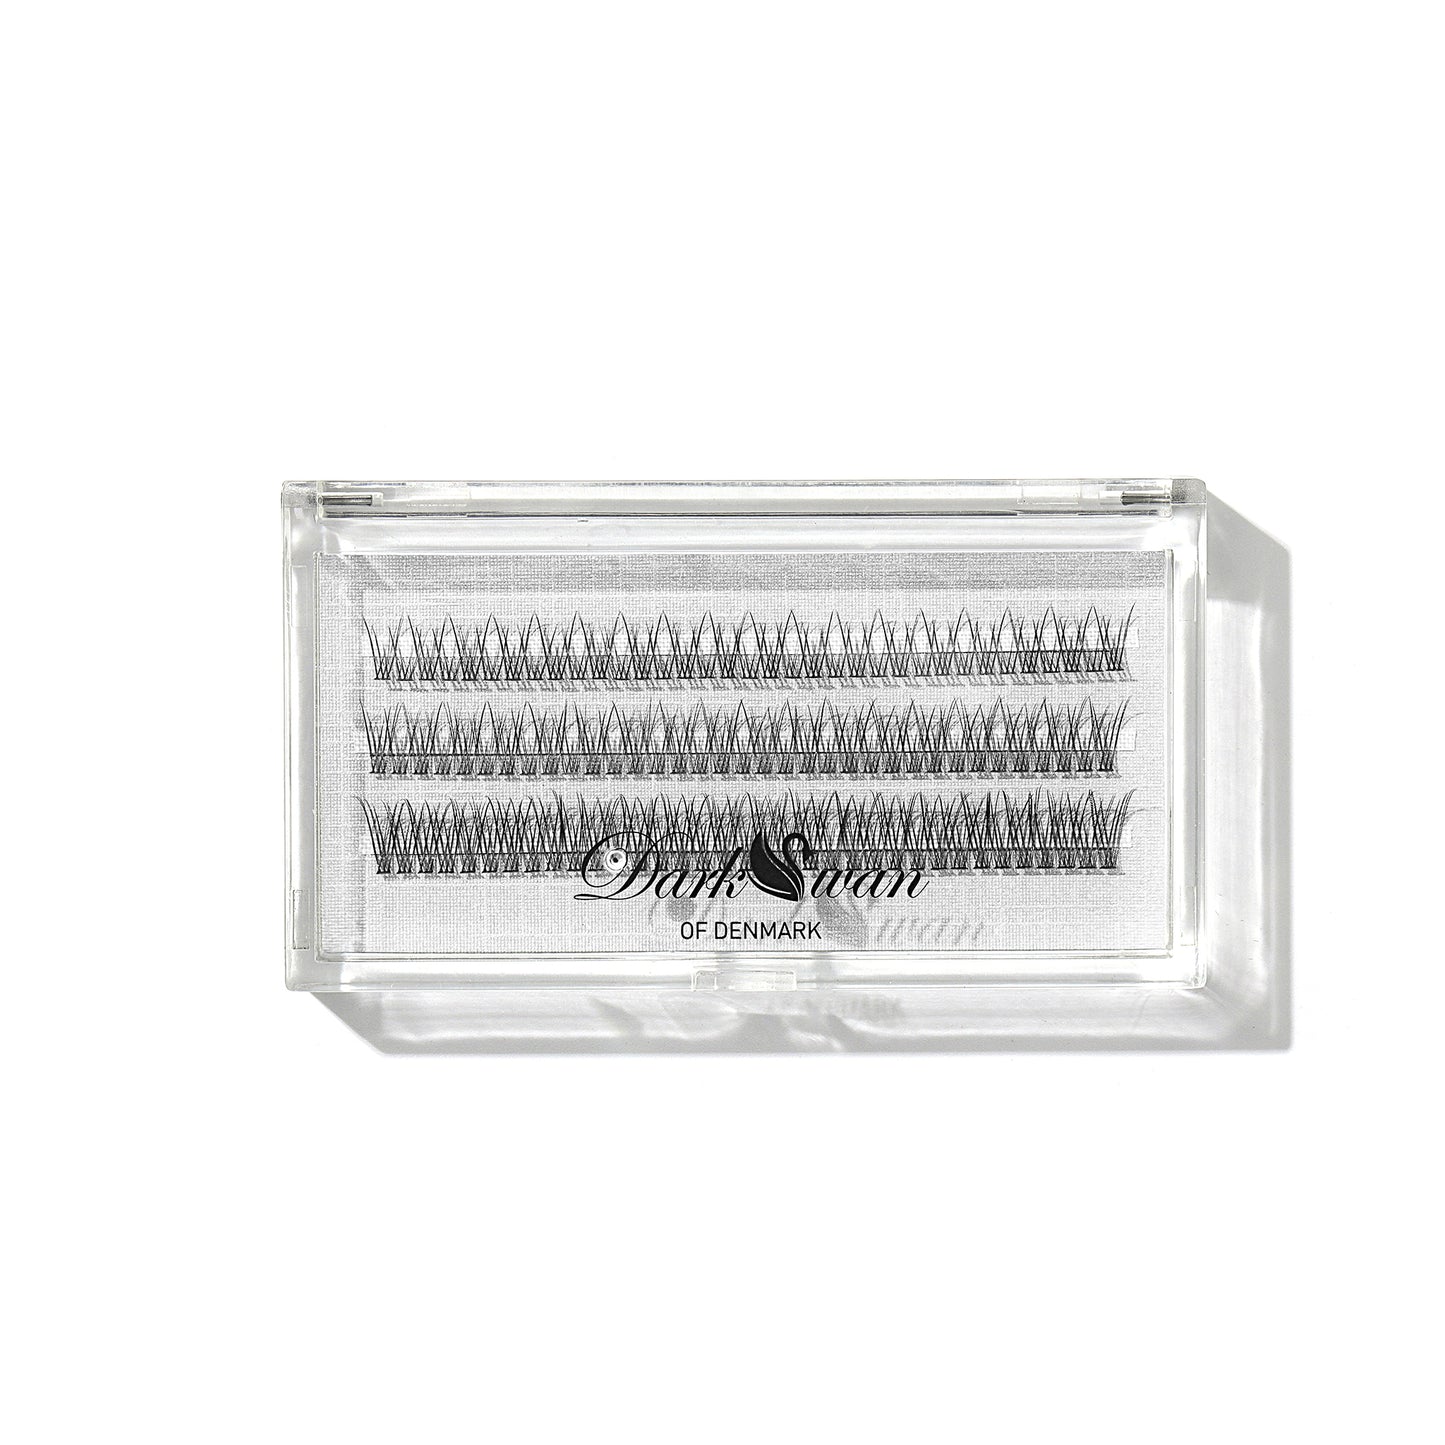 Clear acrylic box with three rows of individual lashes from Dark Swan of Denmark.